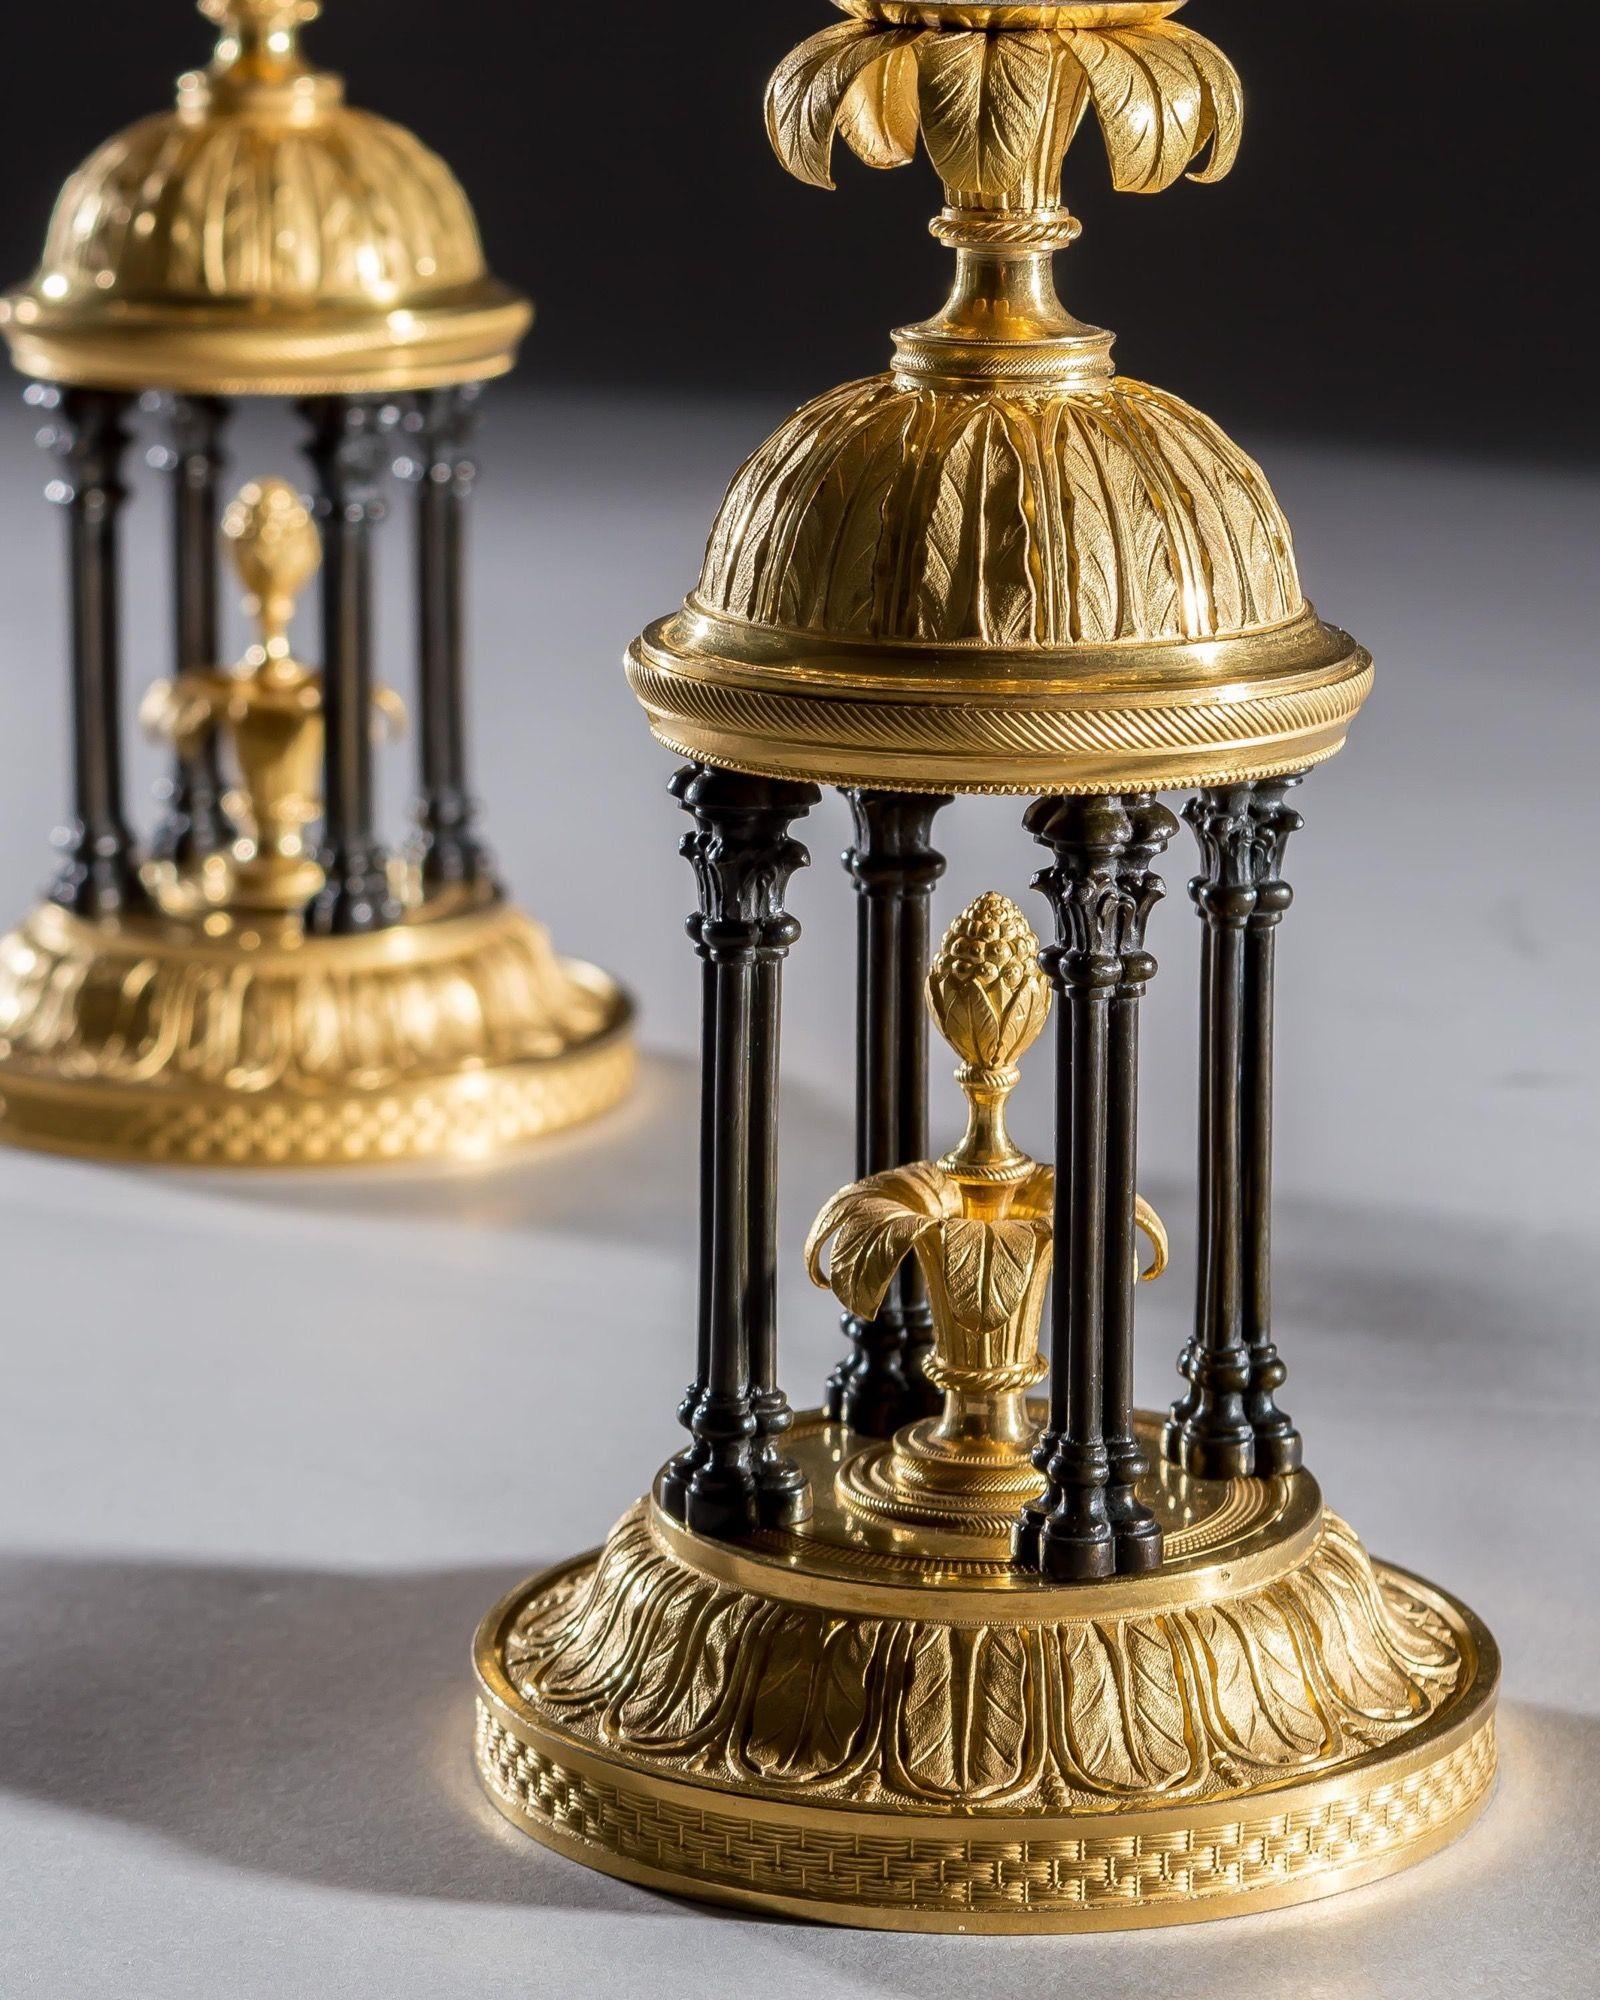 A exceptional pair of candelabra of temple form, the finely chased ormolu bases with basket weave band and foliate decoration supported on bronze columns, issuing twin scroll arms fitted with candle nozzles and drip pans, the central column with